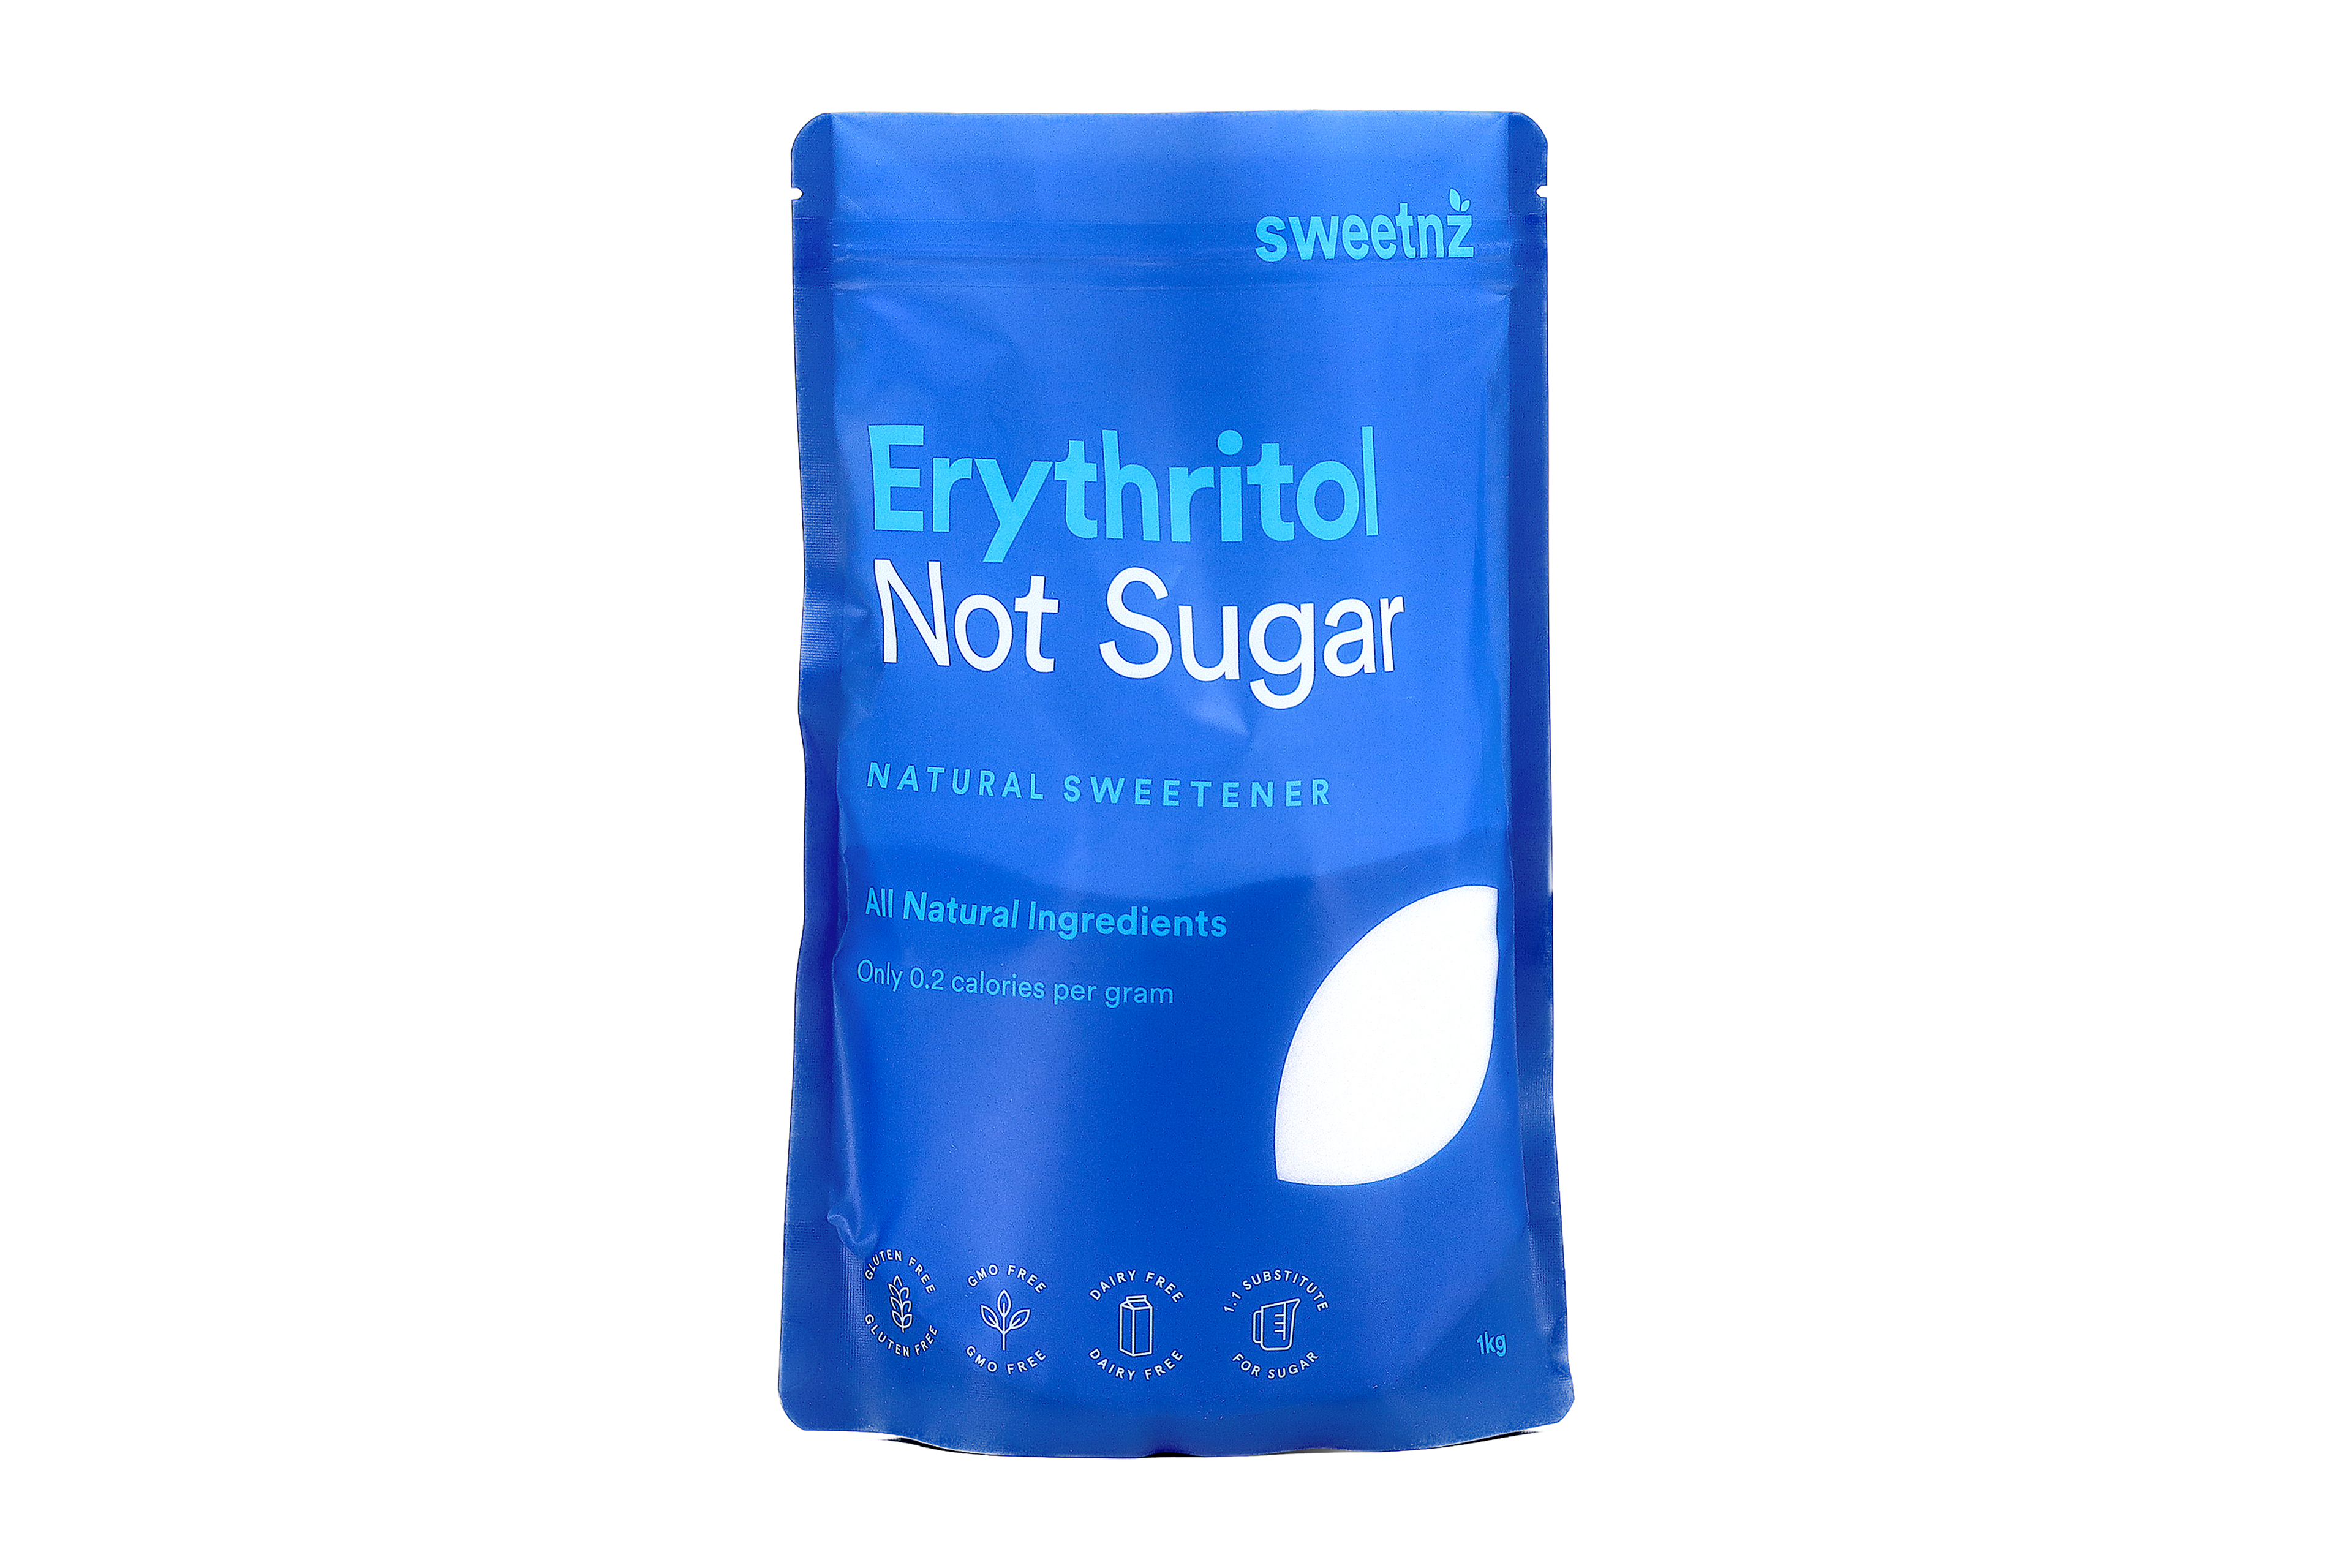 Erythritol 1kg. 70% the sweetness of table sugar, but without the calories!